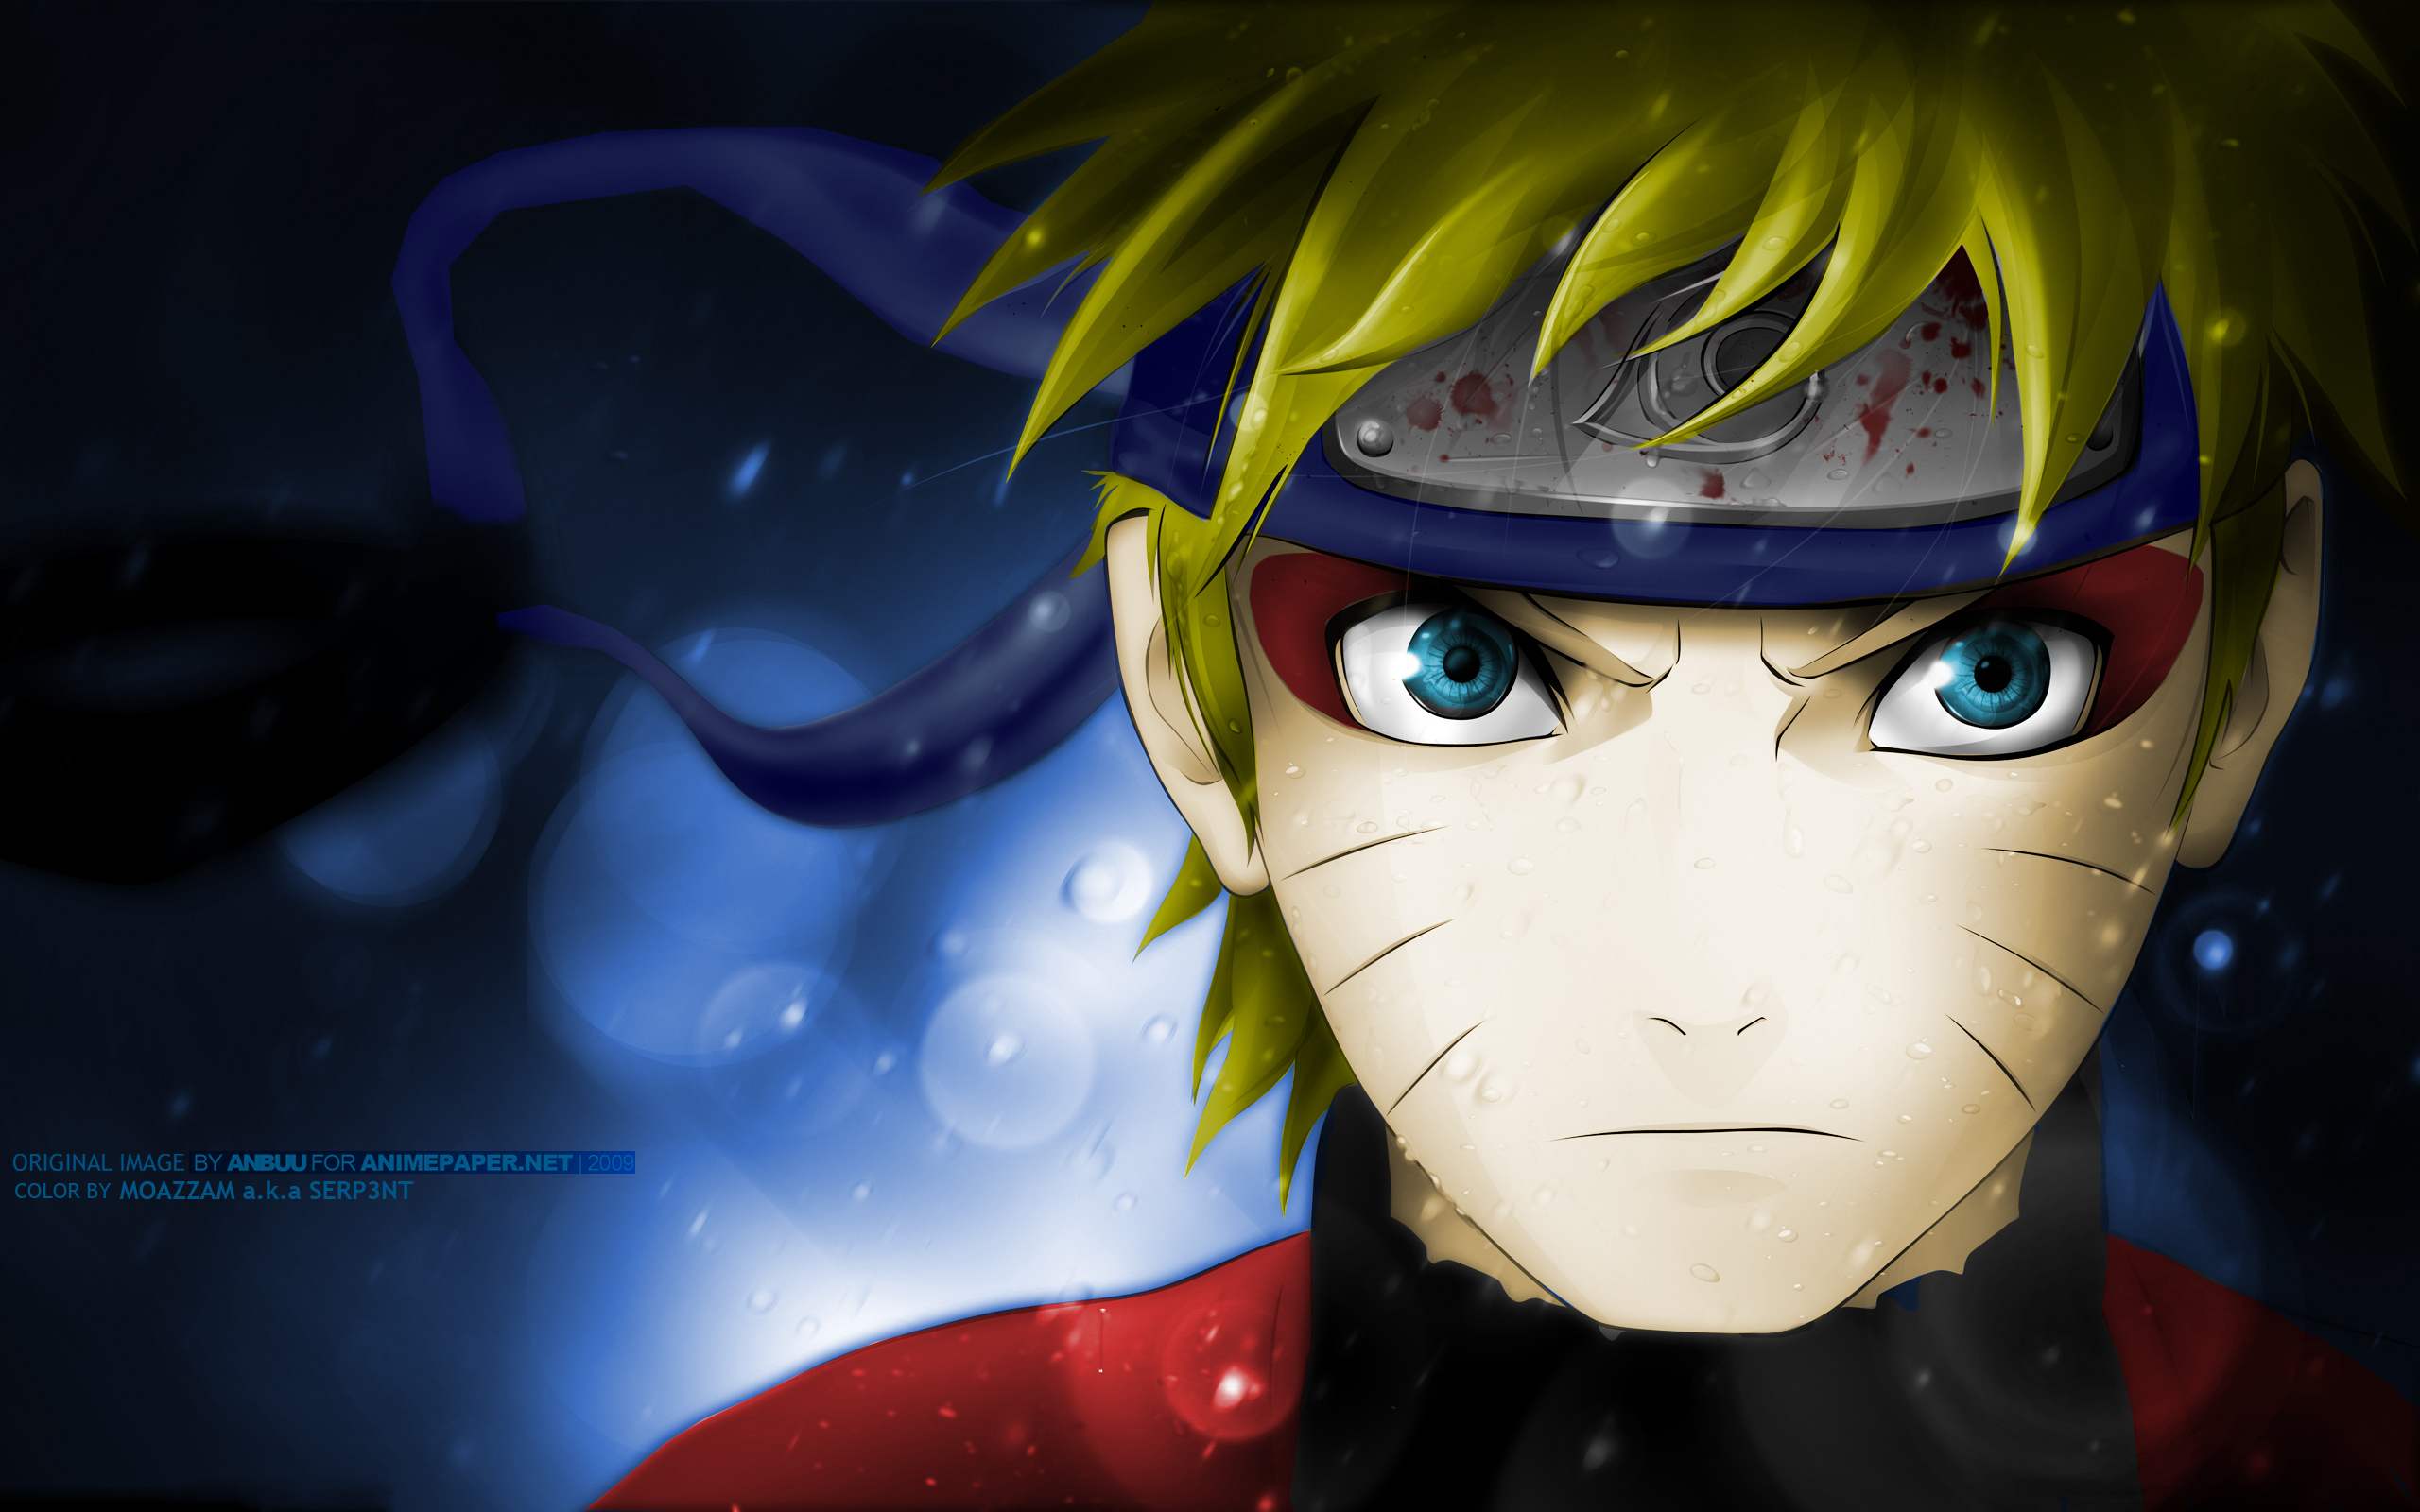 Naruto Shippuden Pictures And Wallpapers - Wallpaper Cave